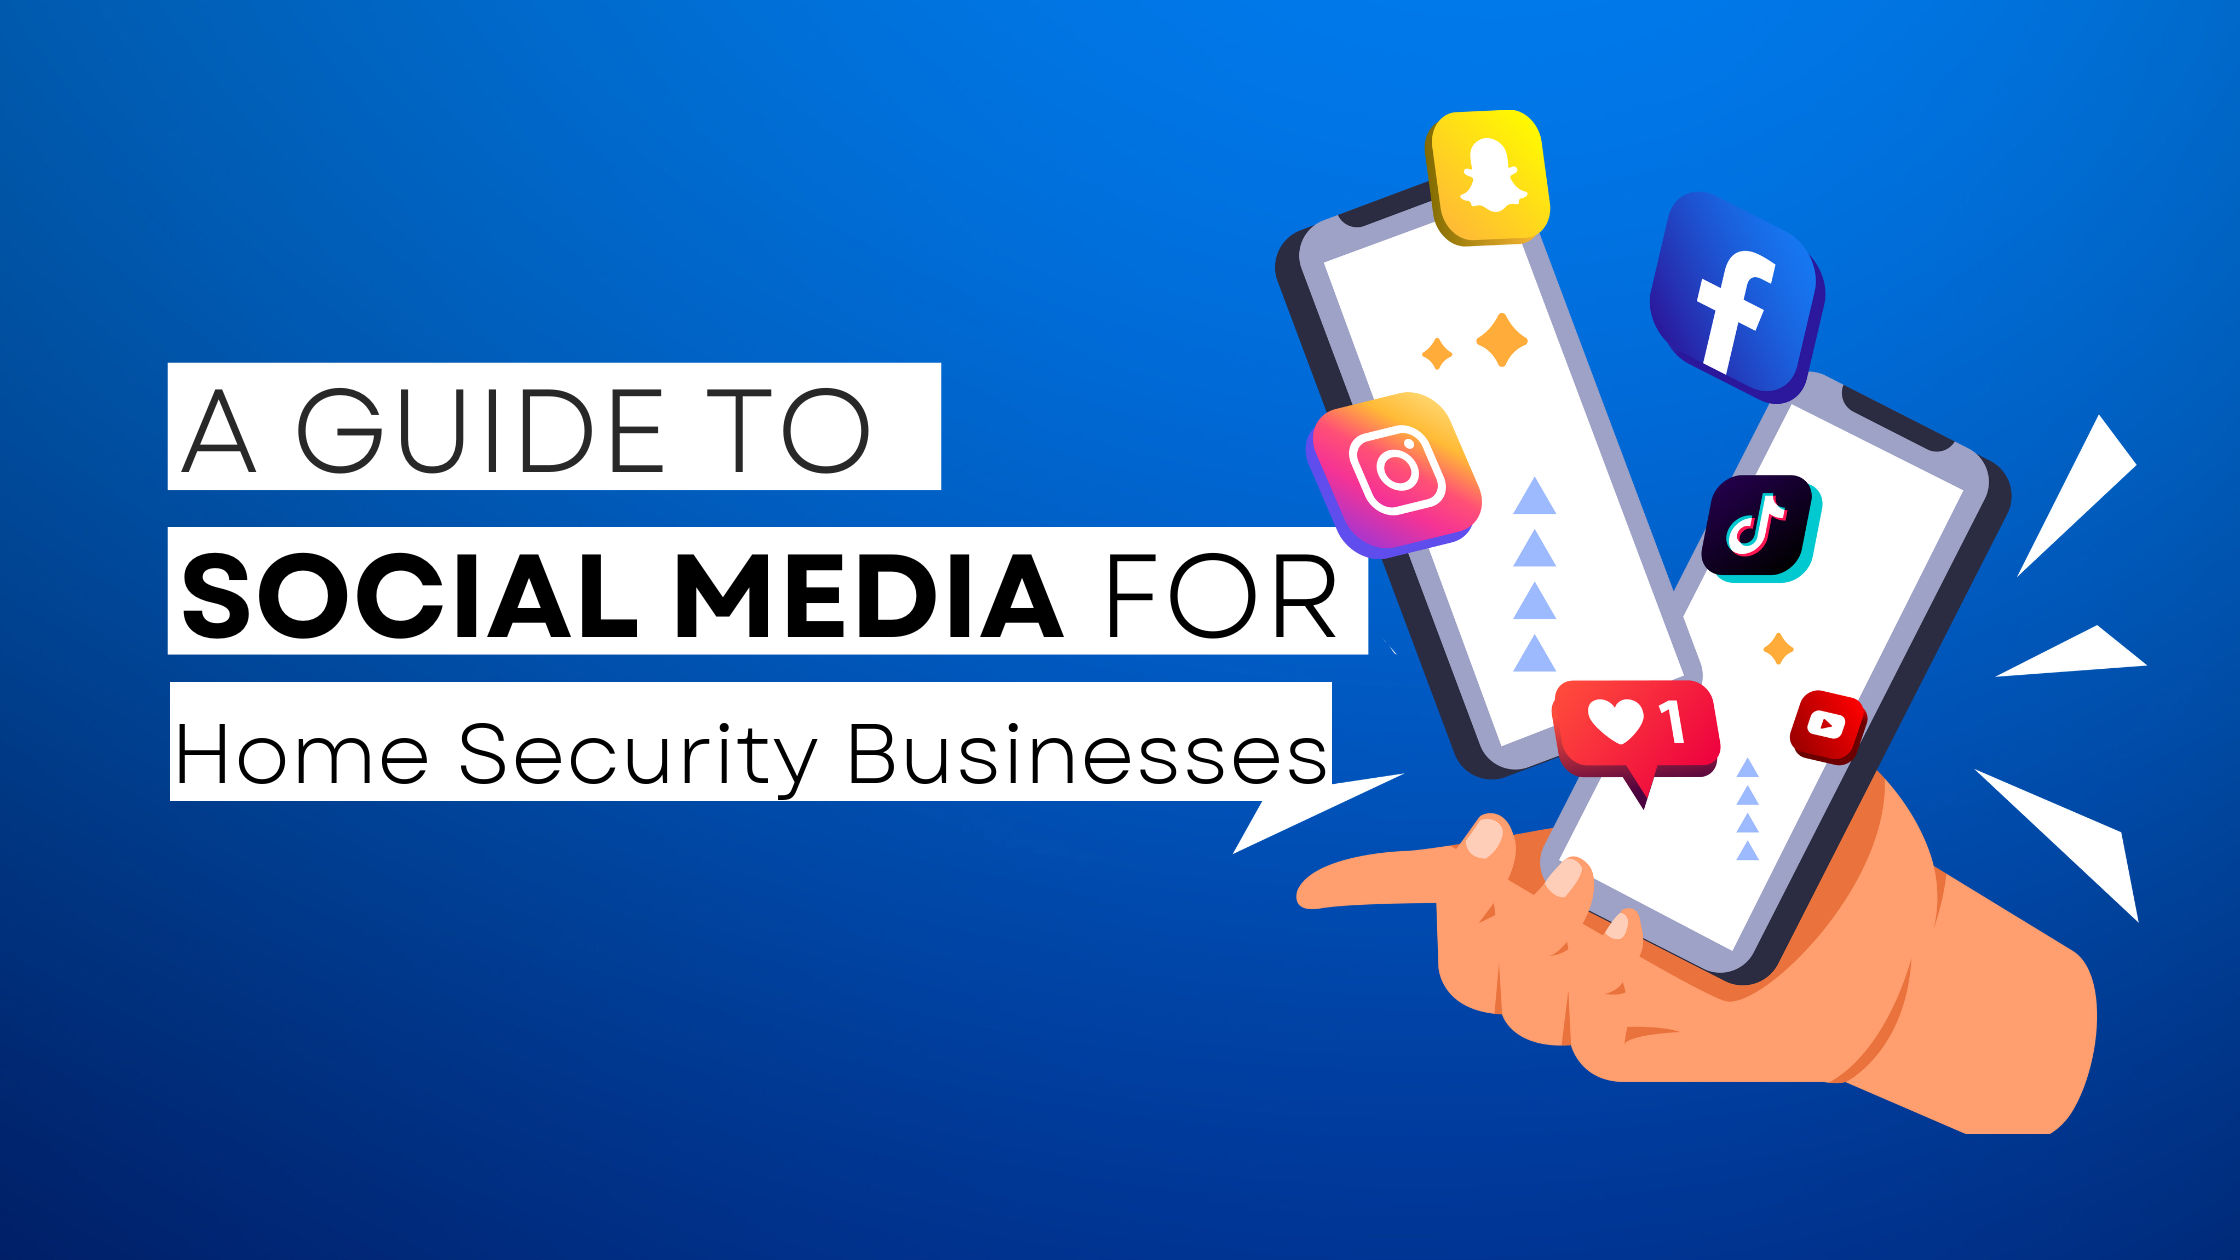 How to start Home Security  on social media